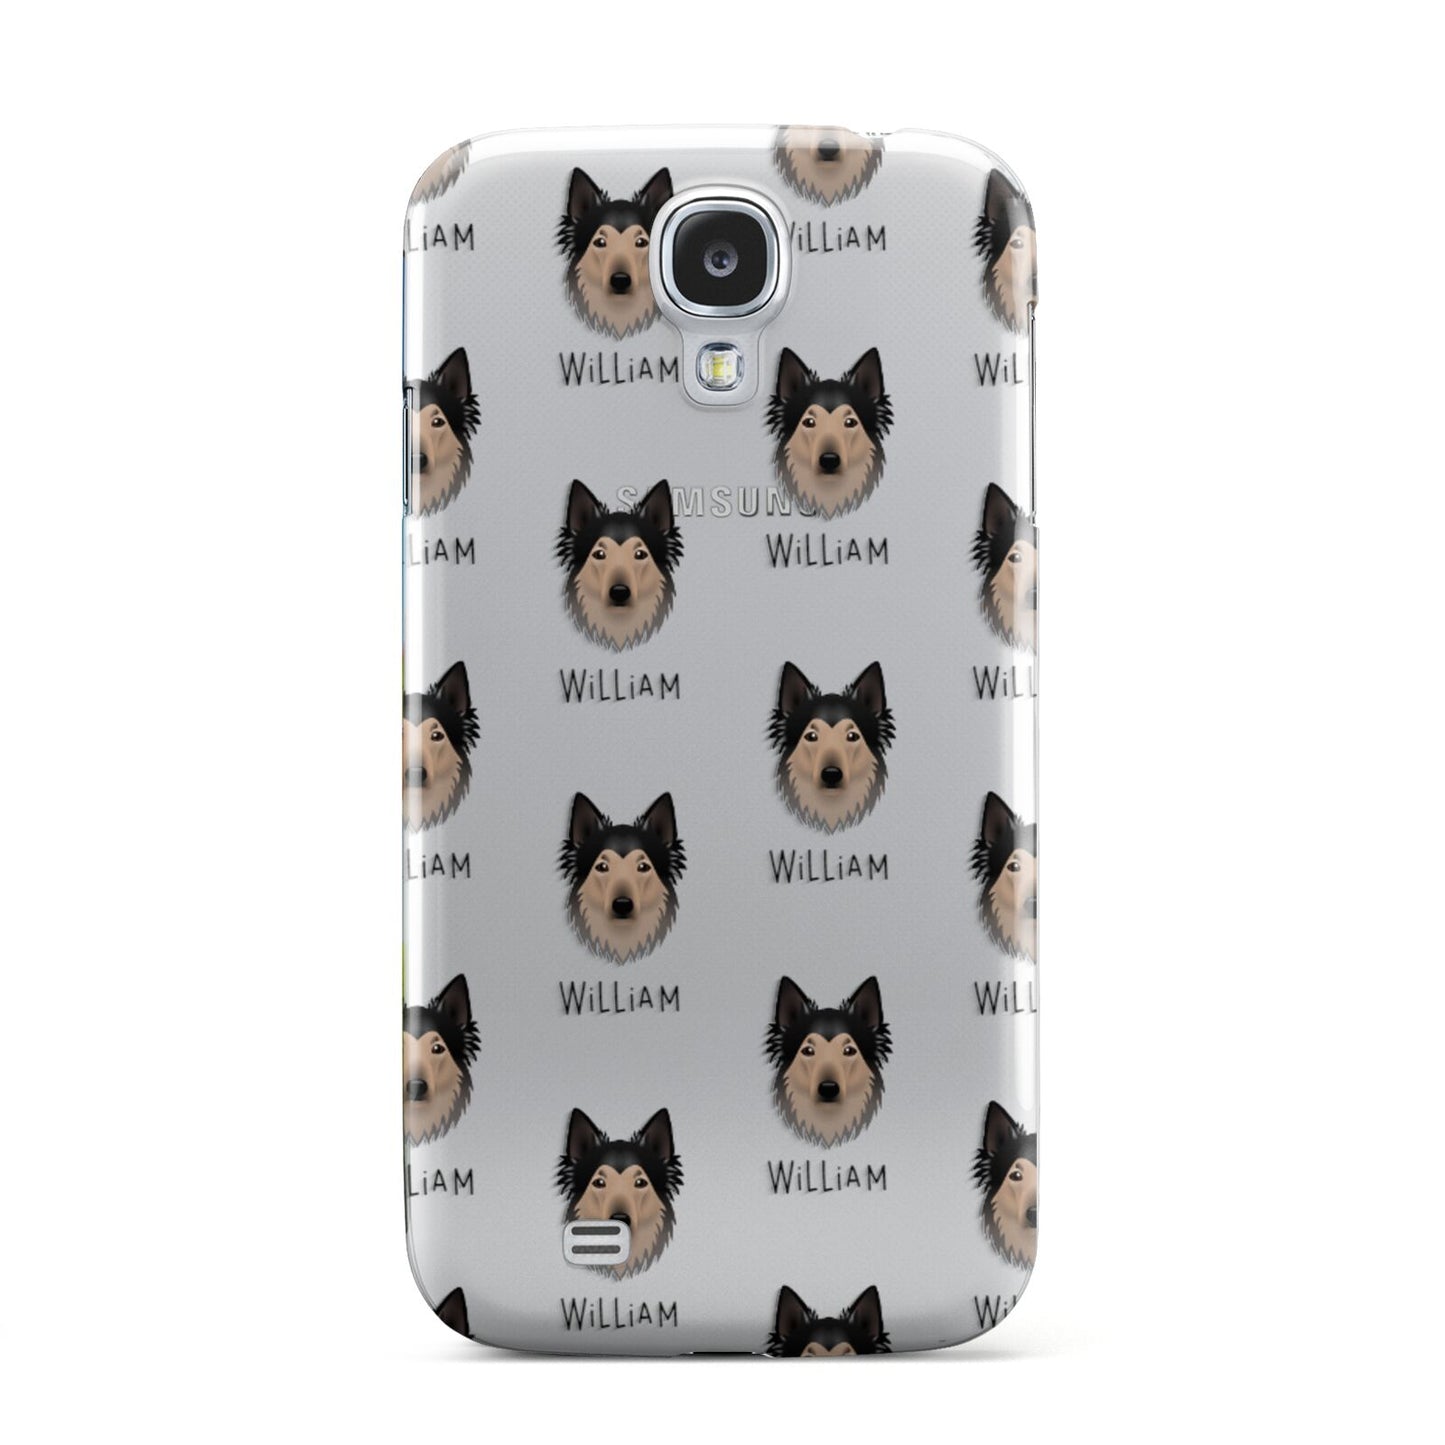 Shollie Icon with Name Samsung Galaxy S4 Case